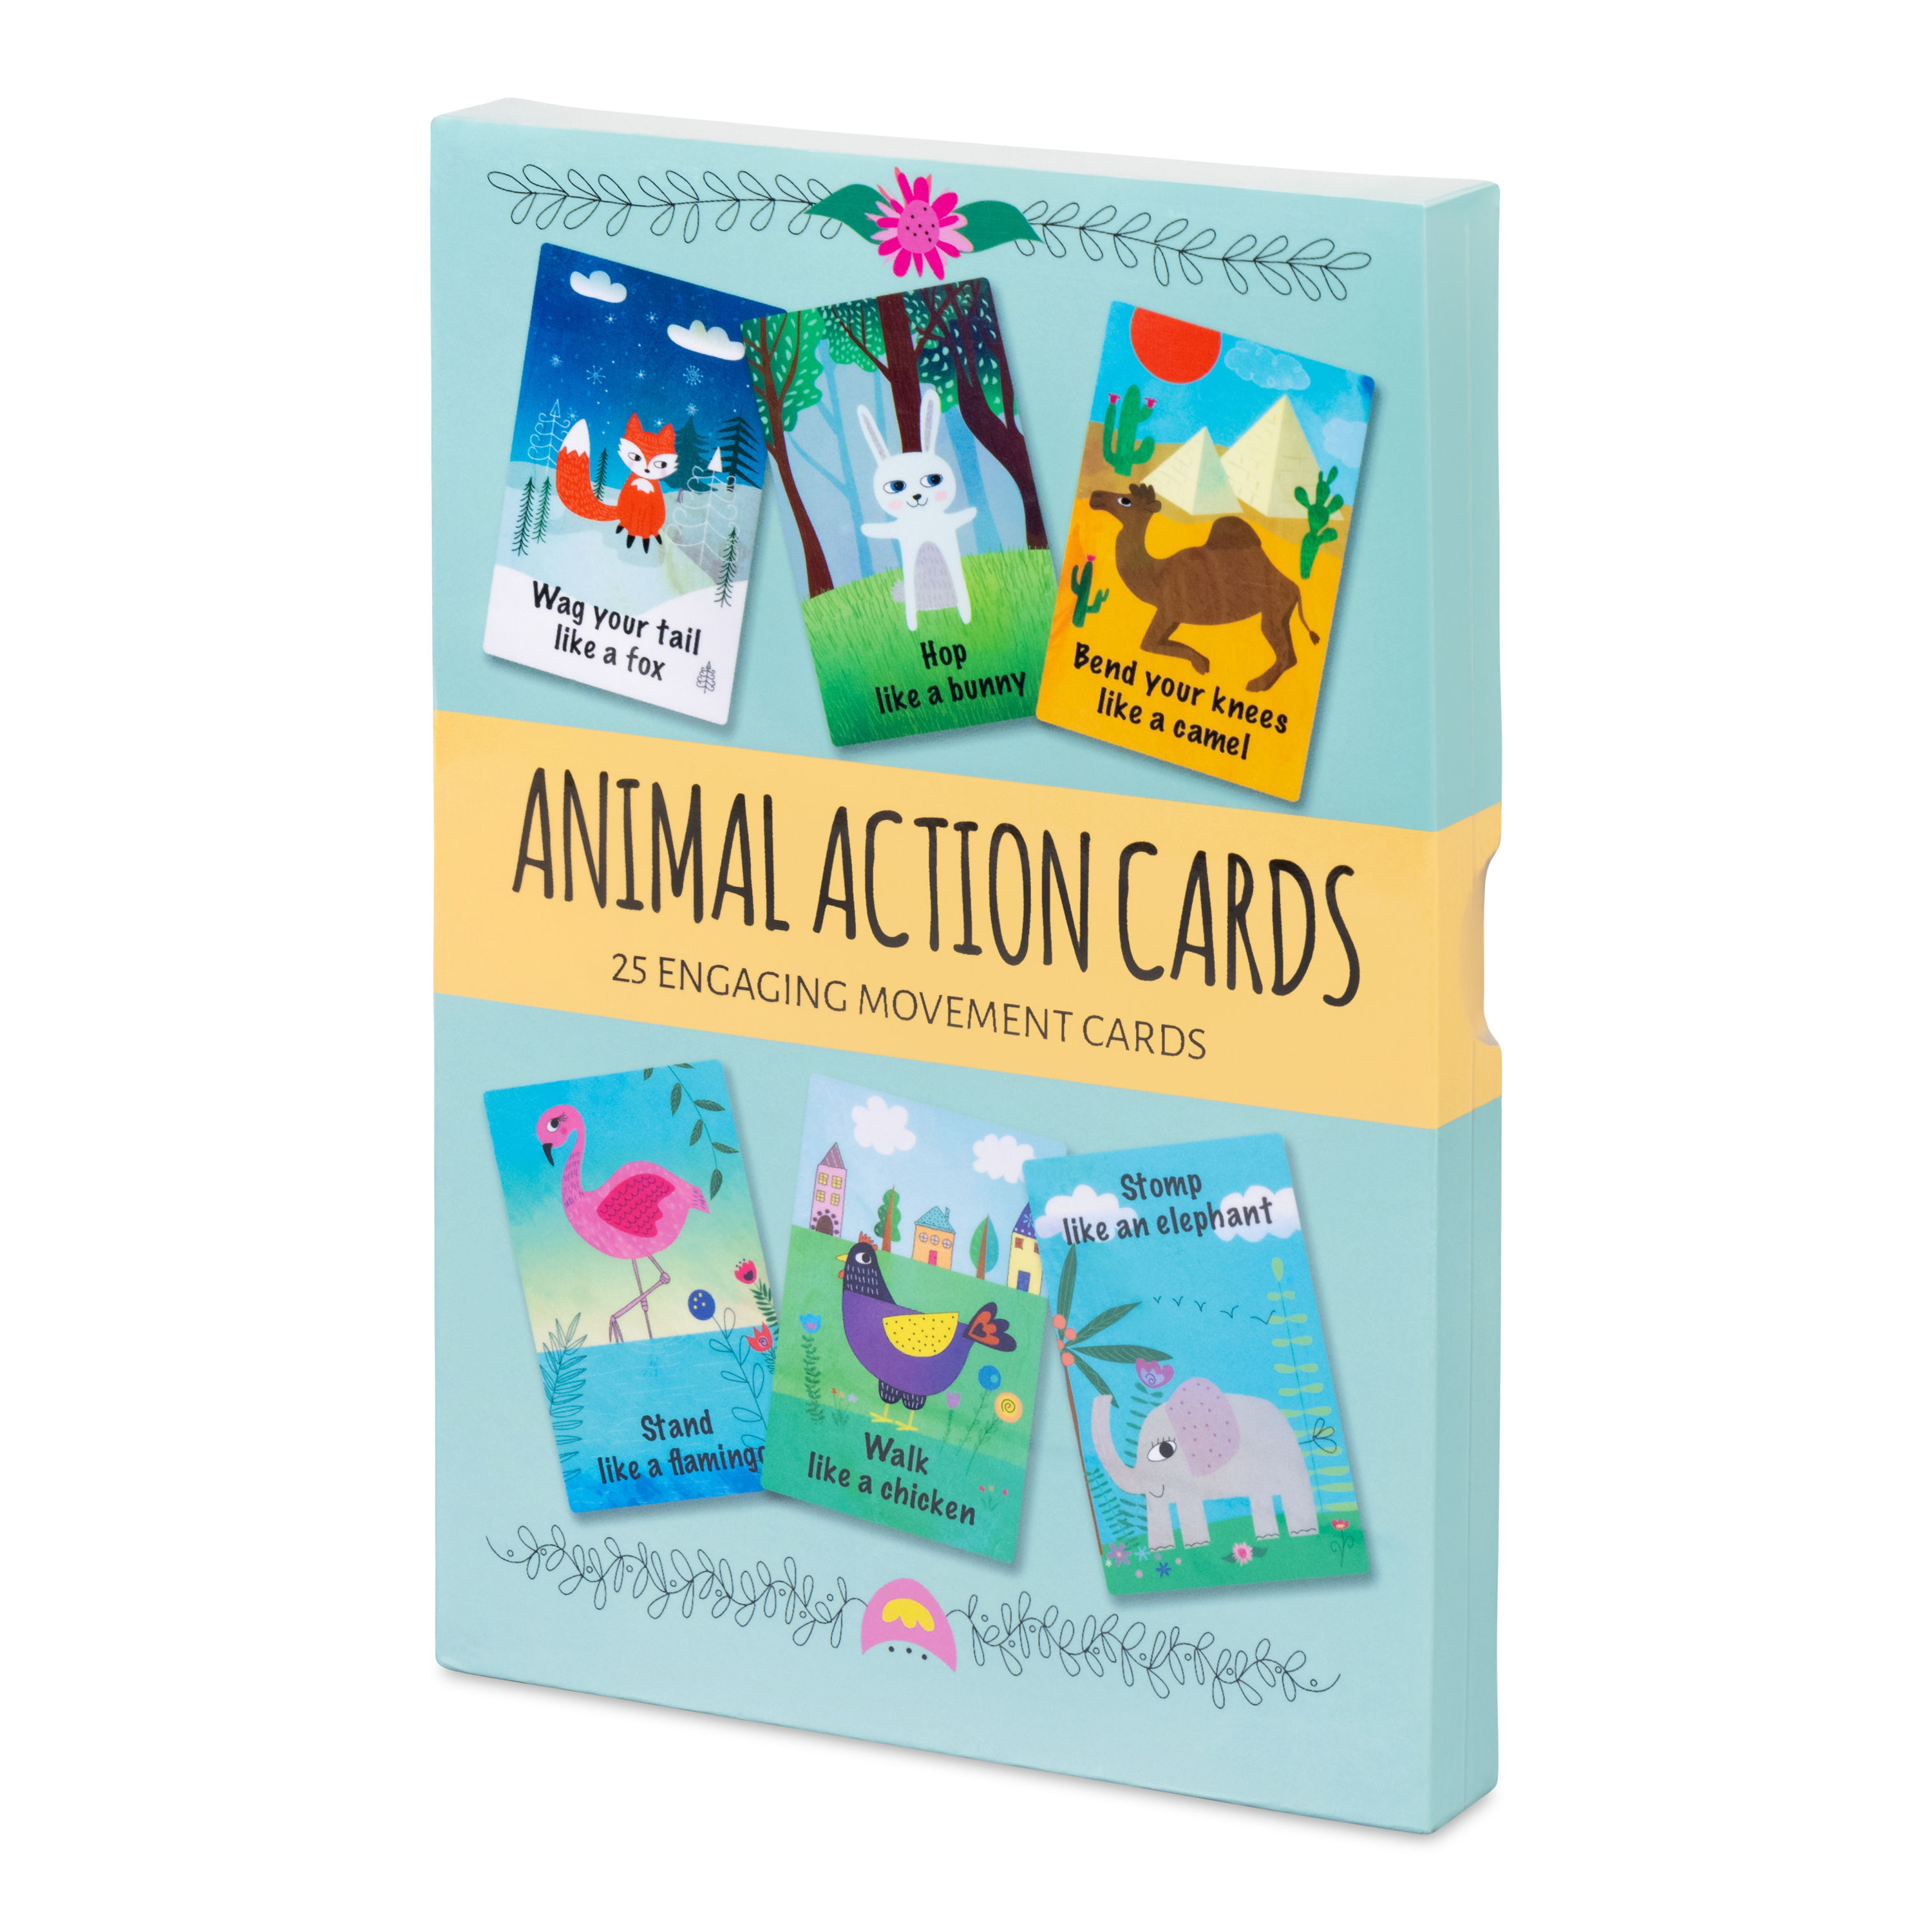 Animal action cards